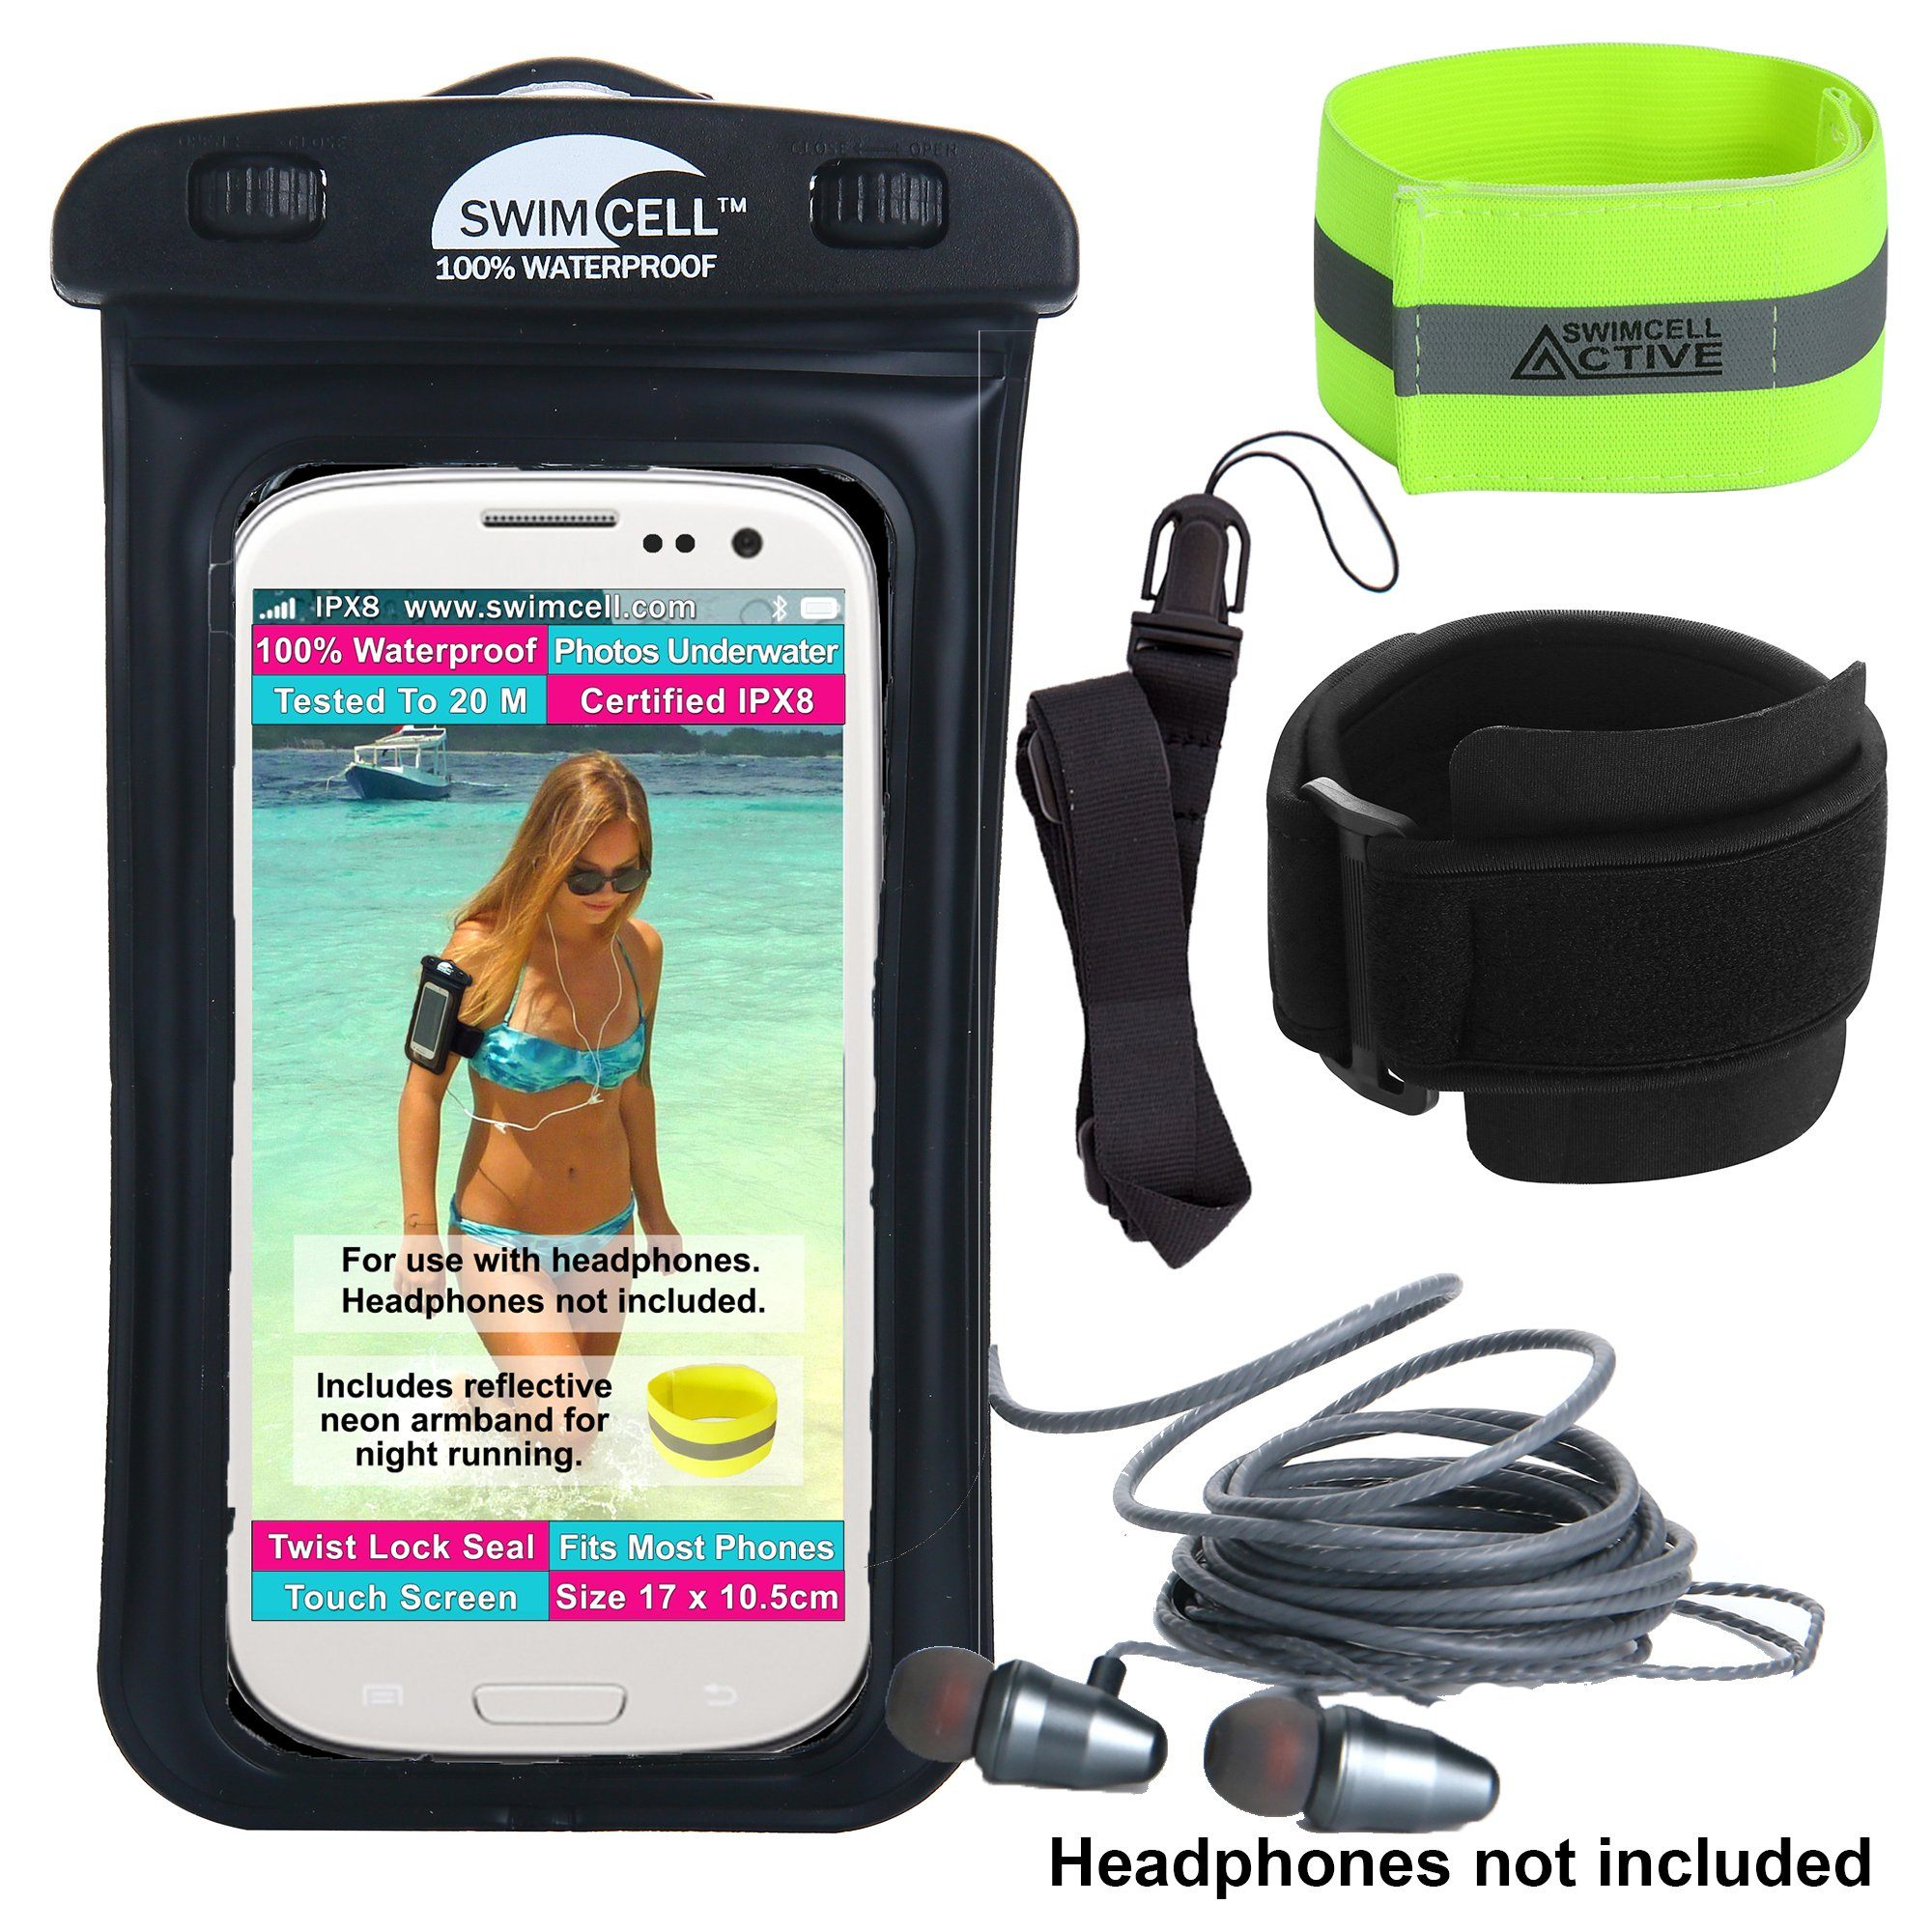 Let's Go Running in The Rain With A Waterproof Armband Case For Your Phone!